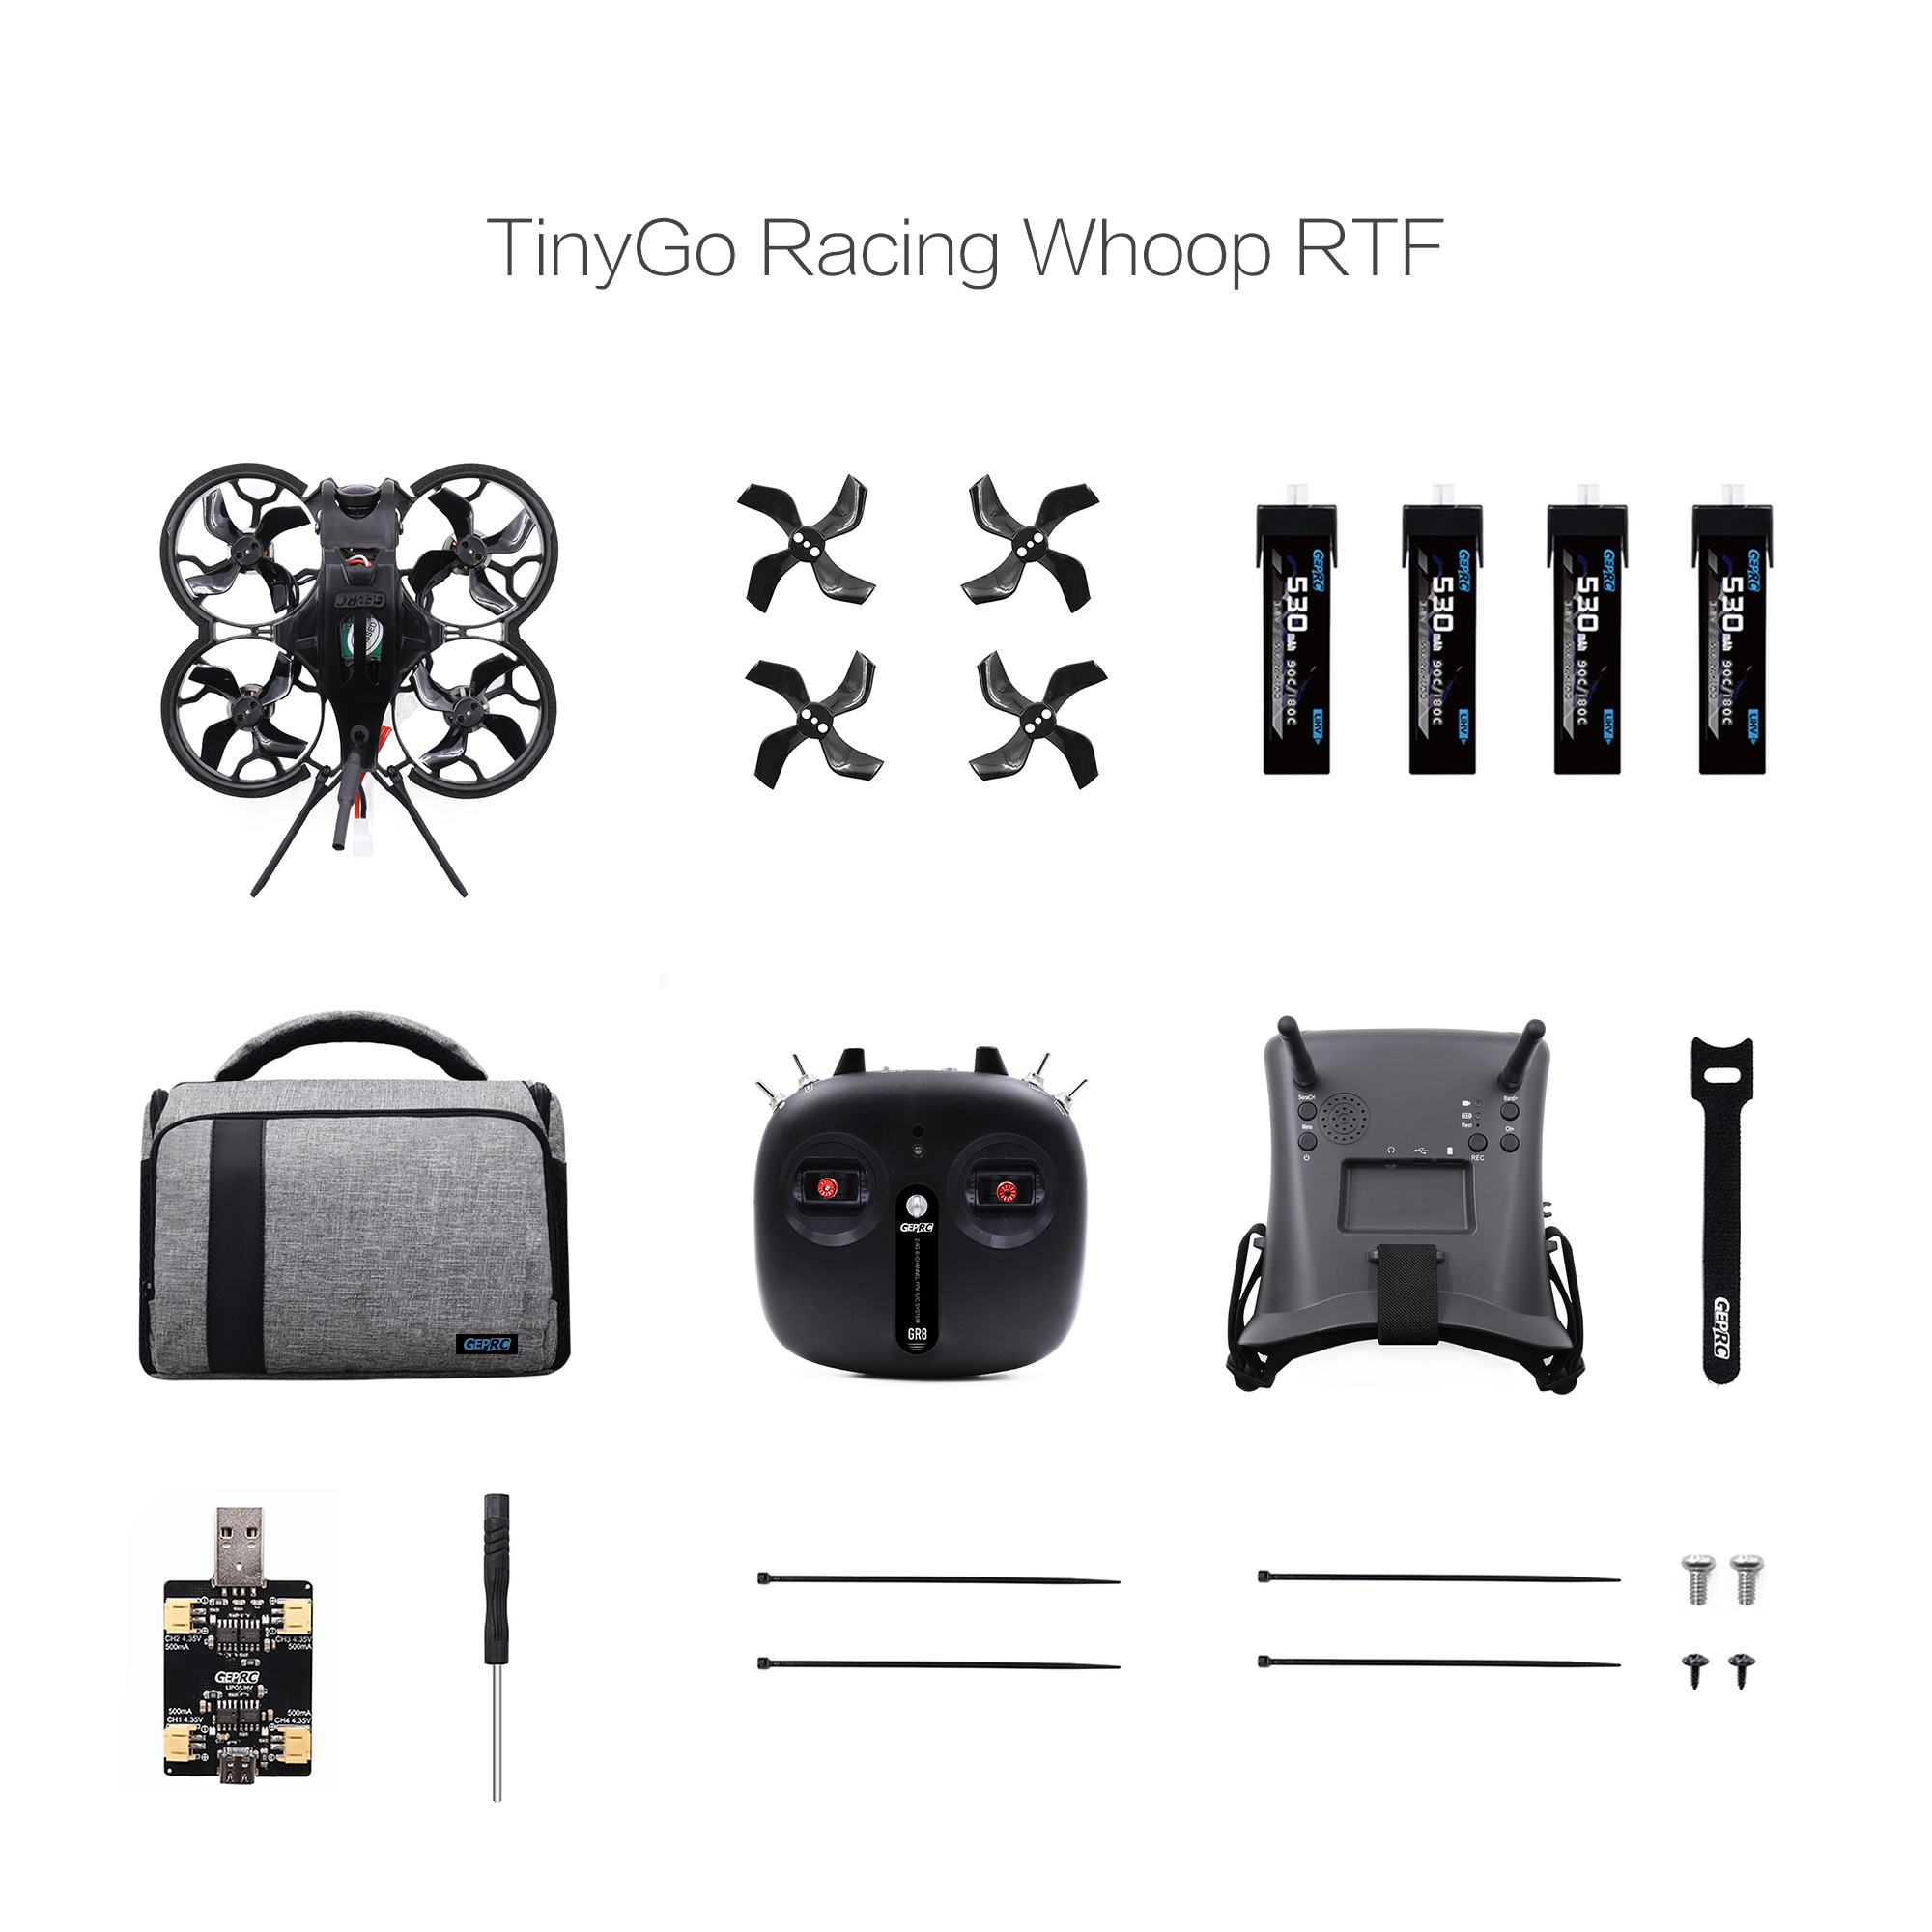 GEPRC-TinyGO-16inch-2S-FPV-Indoor-Whoop-Runcam-Nano2-GR8-Remote-ControllerRG1-Goggles-RTF-Ready-To-F-1788771-1